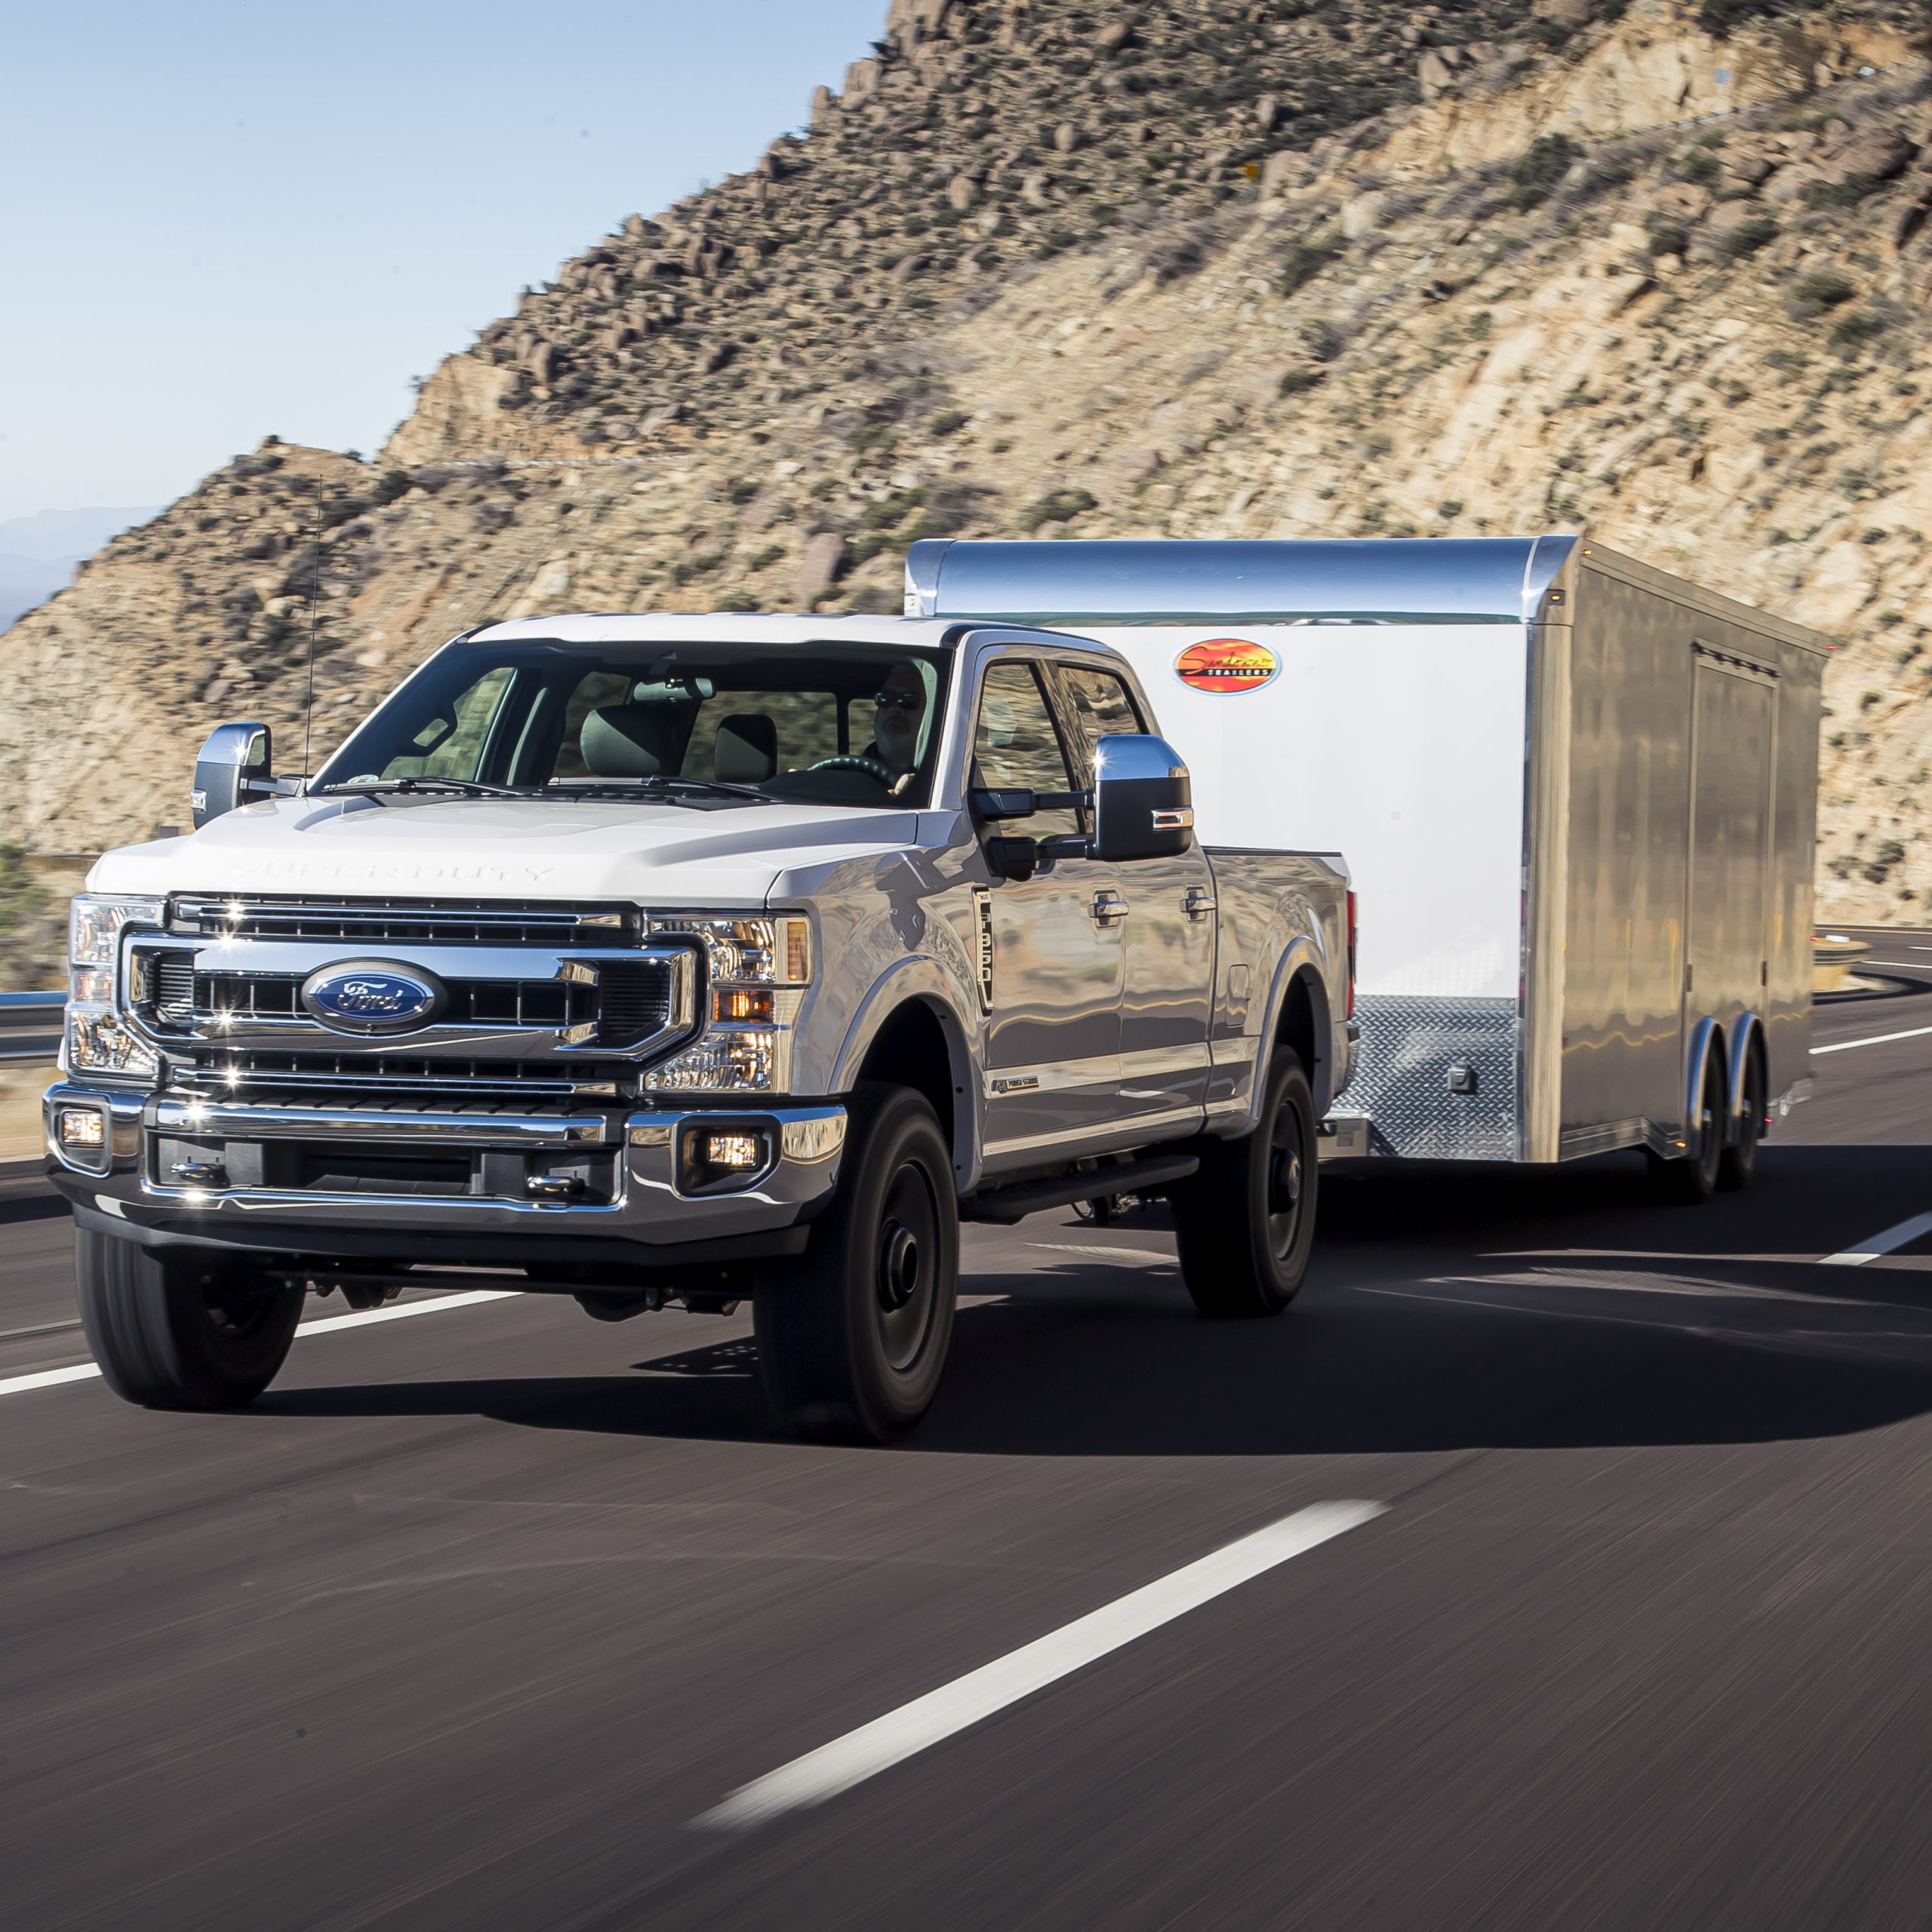 Ford F350 Comes Loaded & Payload Ready RPM News Weekly